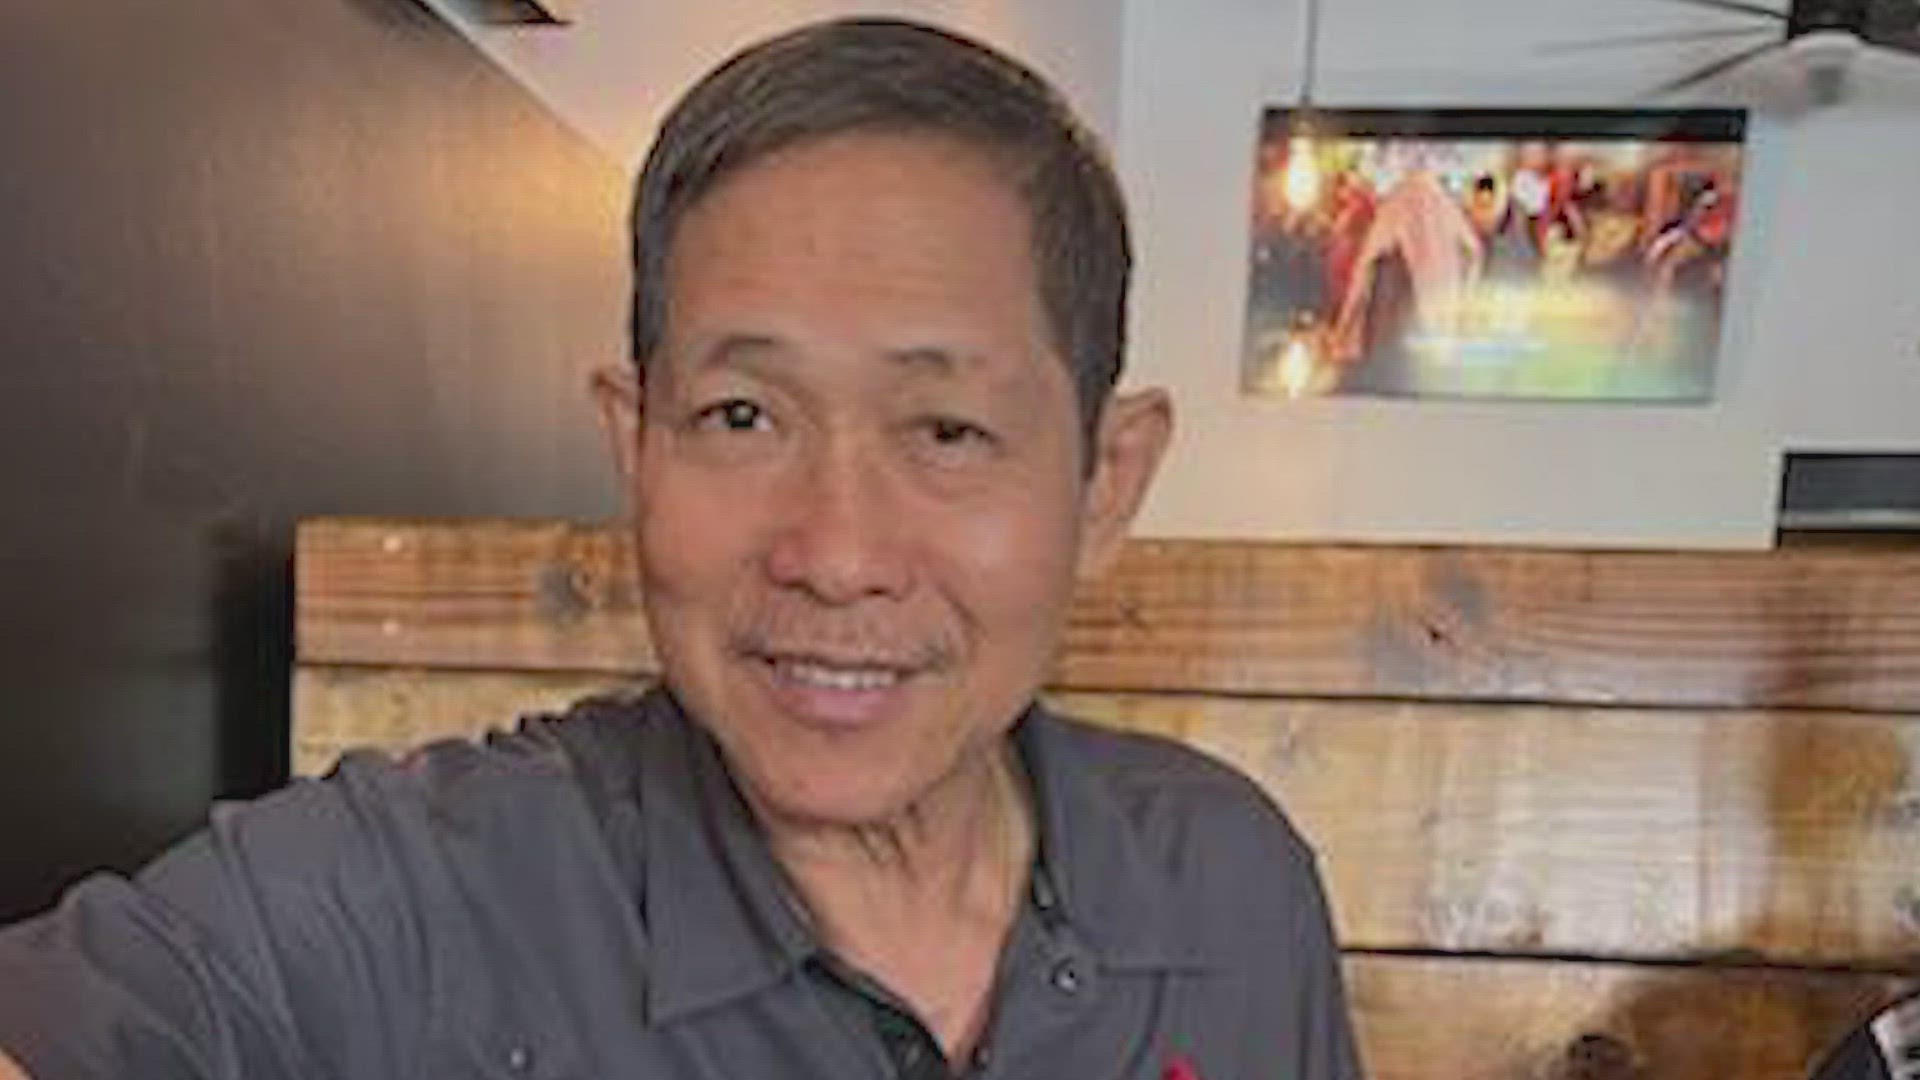 Family members are mourning the death of Dung Doan, 62, of Frisco. Doan and his wife had immigrated from Vietnam to the U.S. one year ago.